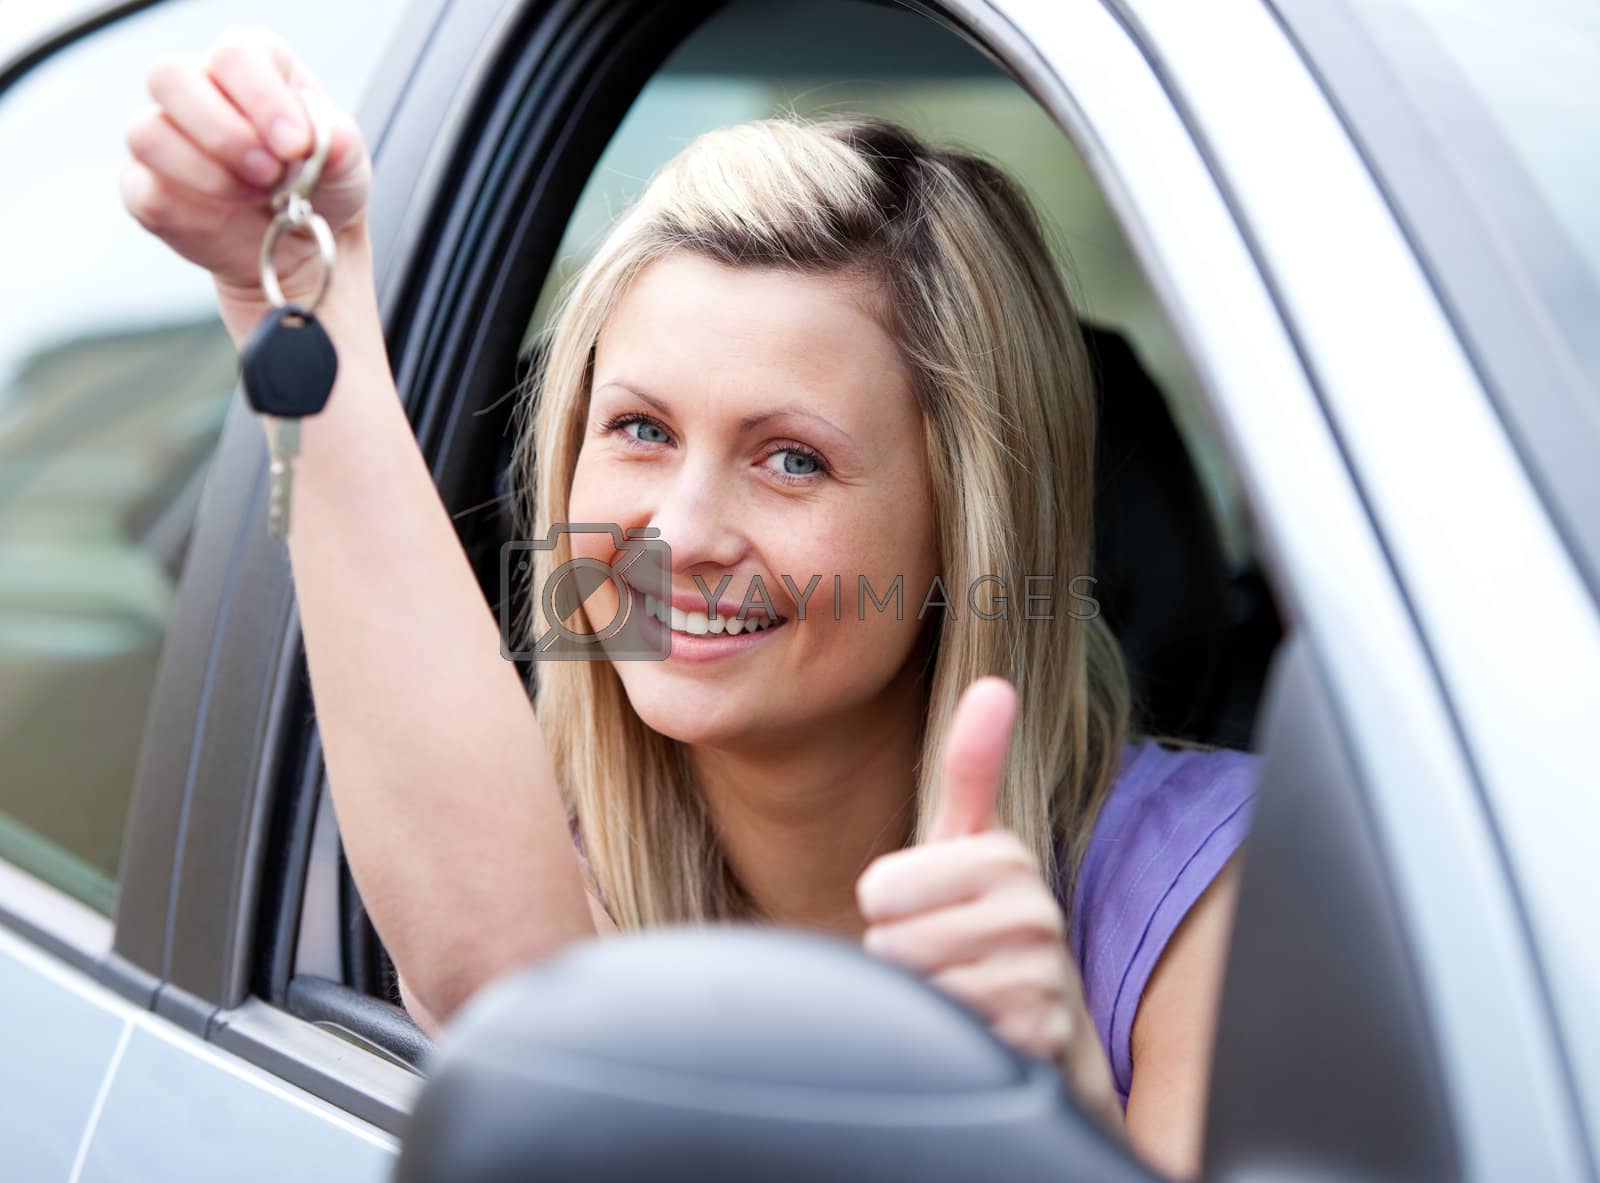 Royalty free image of Lively female driver showing a key after bying a new car  by Wavebreakmedia